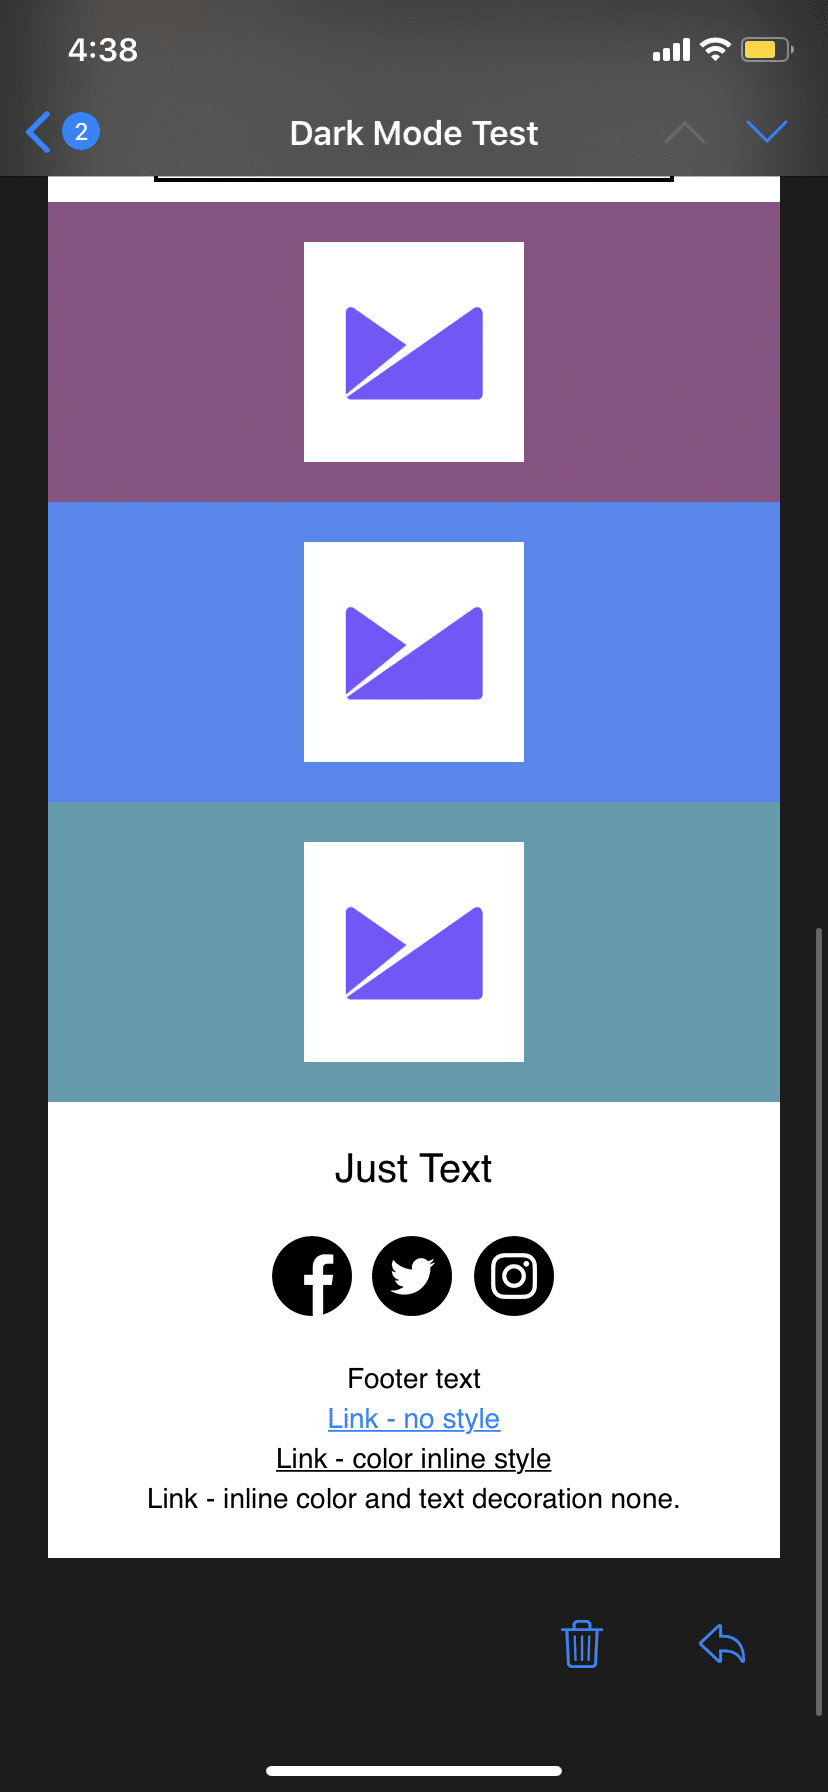 Auto Invert Font Color Based On Background Color